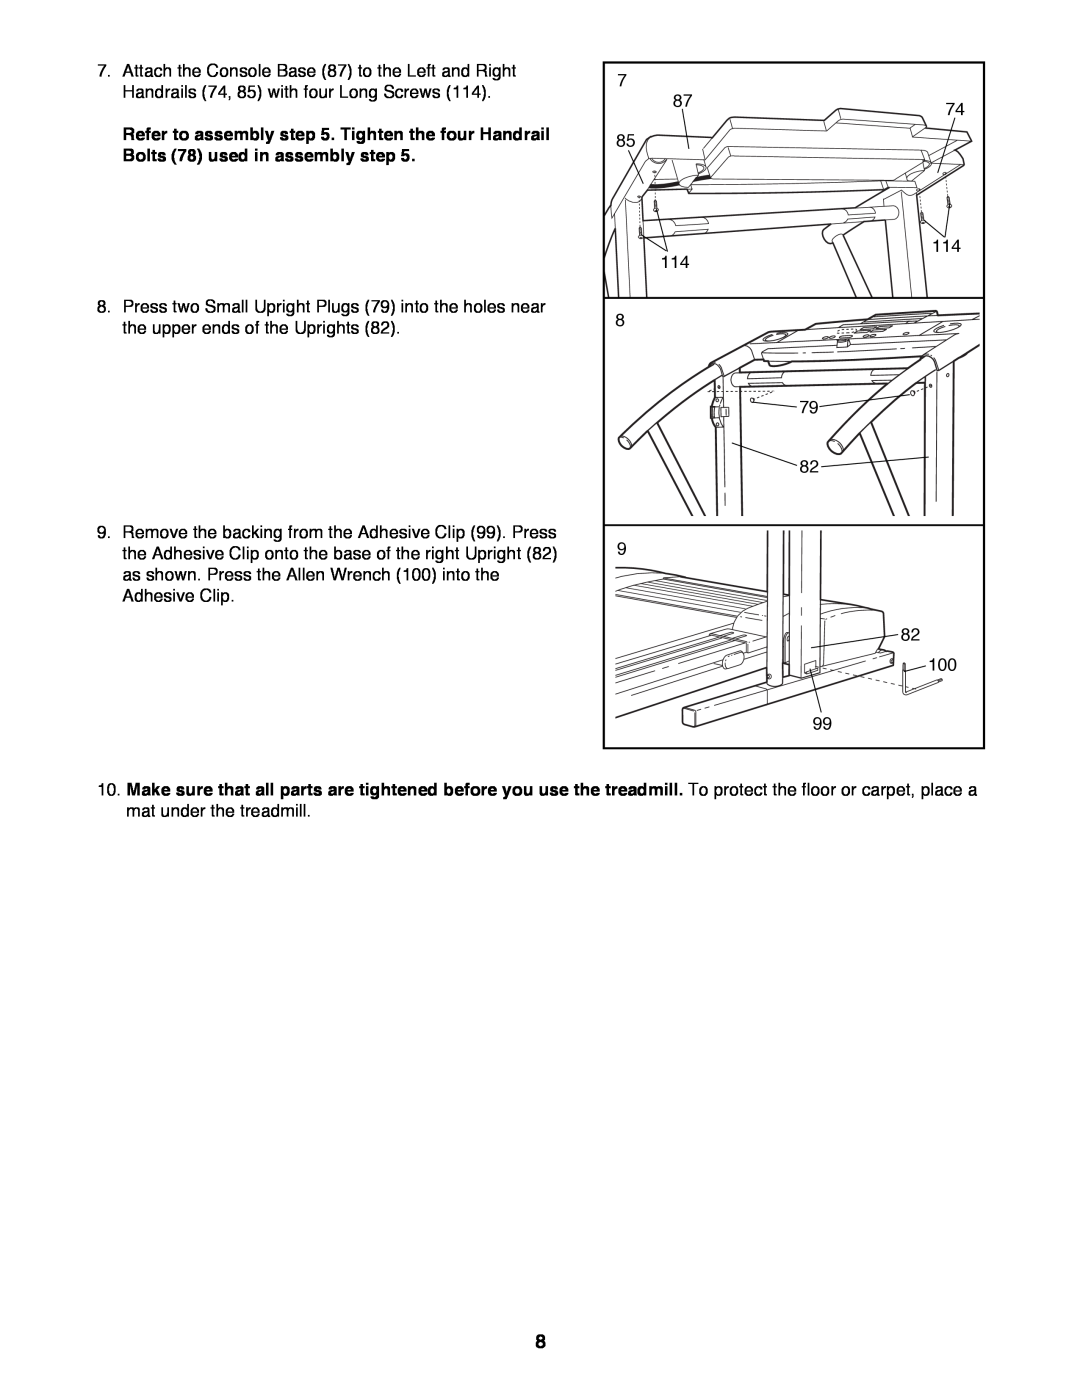 ProForm 831.297791 user manual Refer to assembly . Tighten the four Handrail, Bolts 78 used in assembly step 